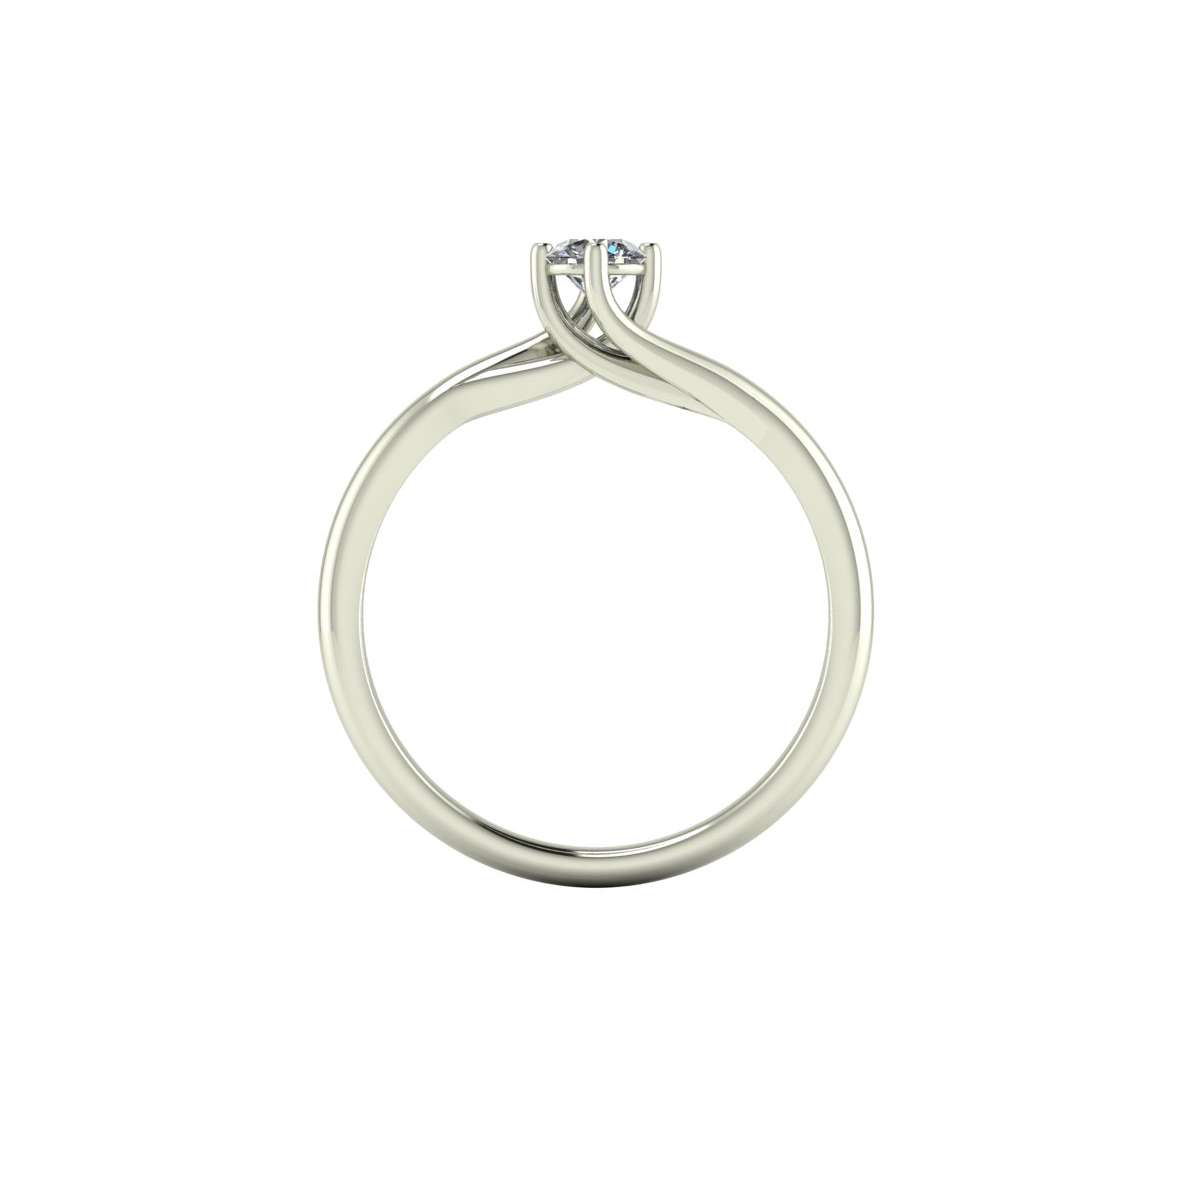 Women's solitaire ring at low prices made of white gold with a GIA carat certificate of 0.30 F-IF